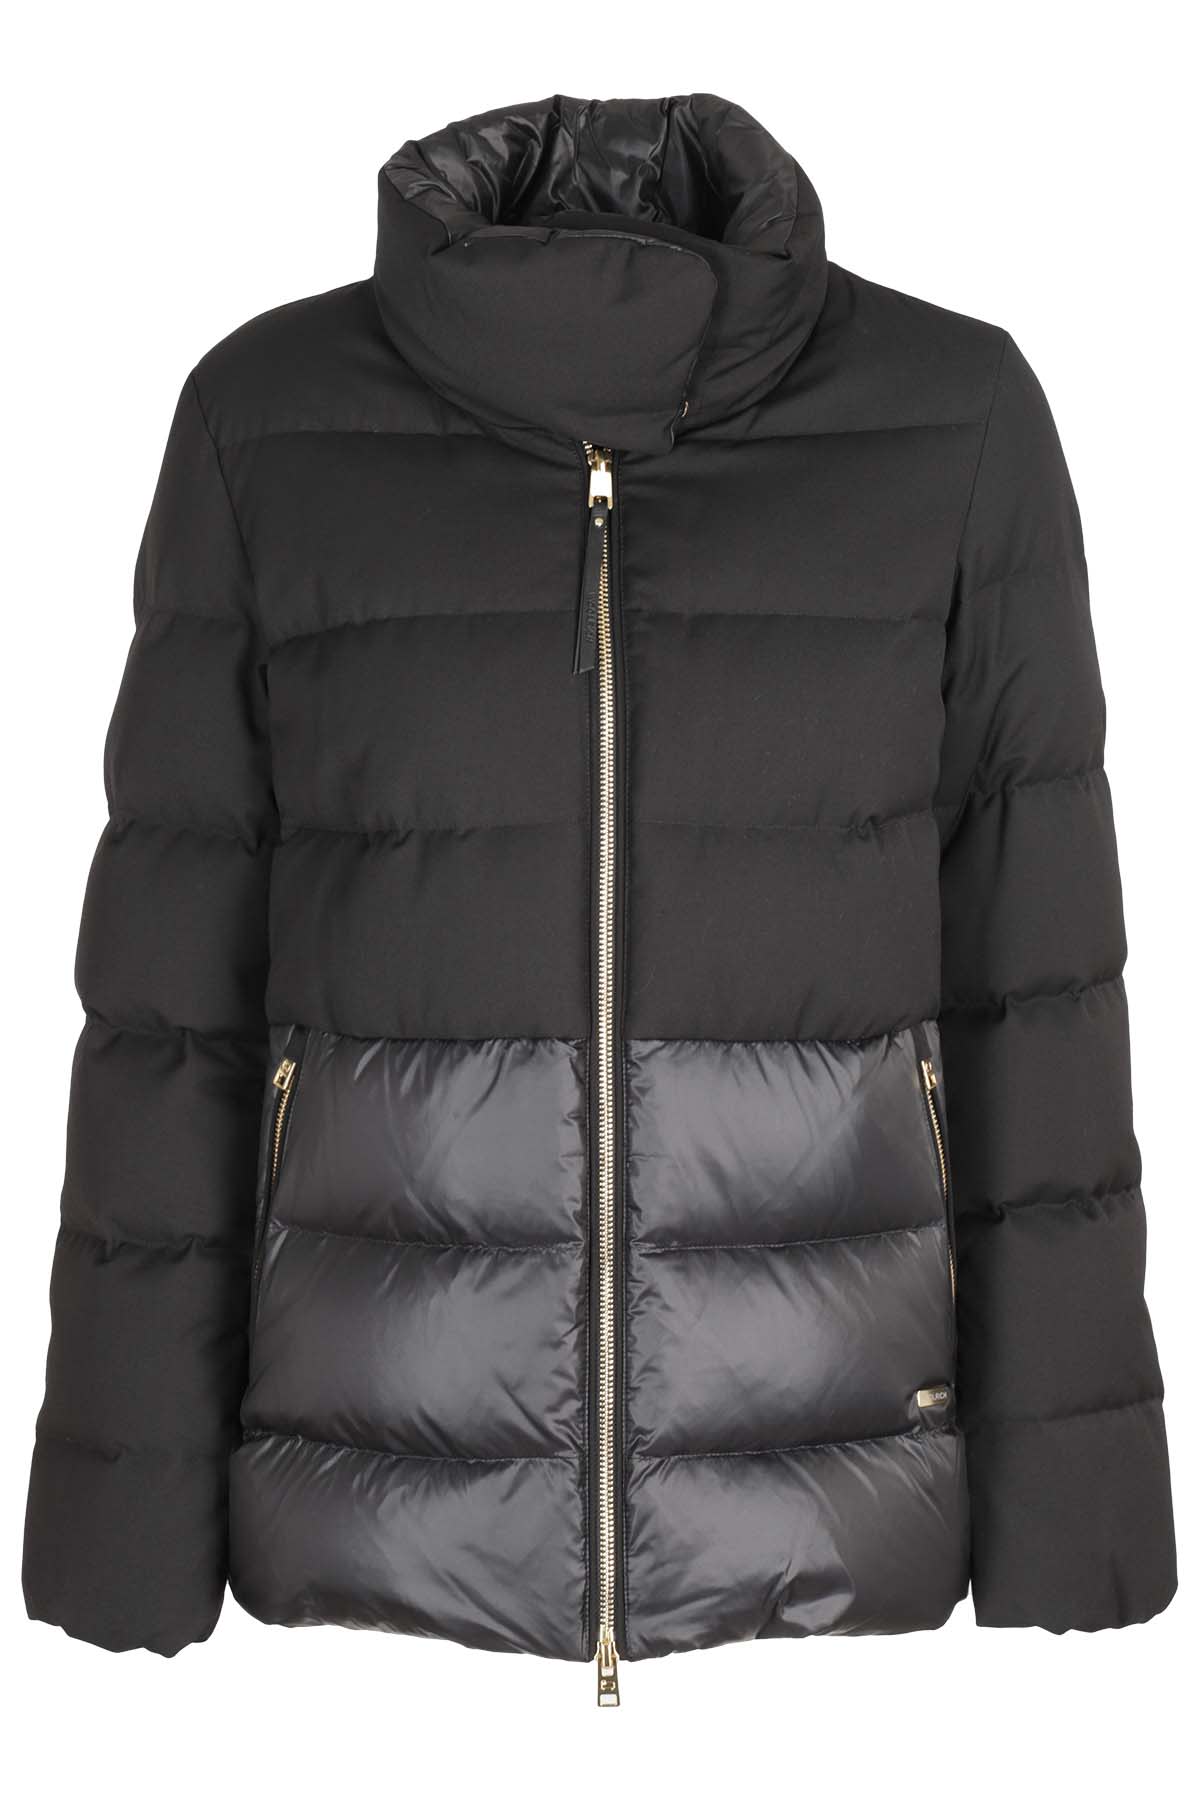 WOOLRICH LUXE PUFFY JACKET